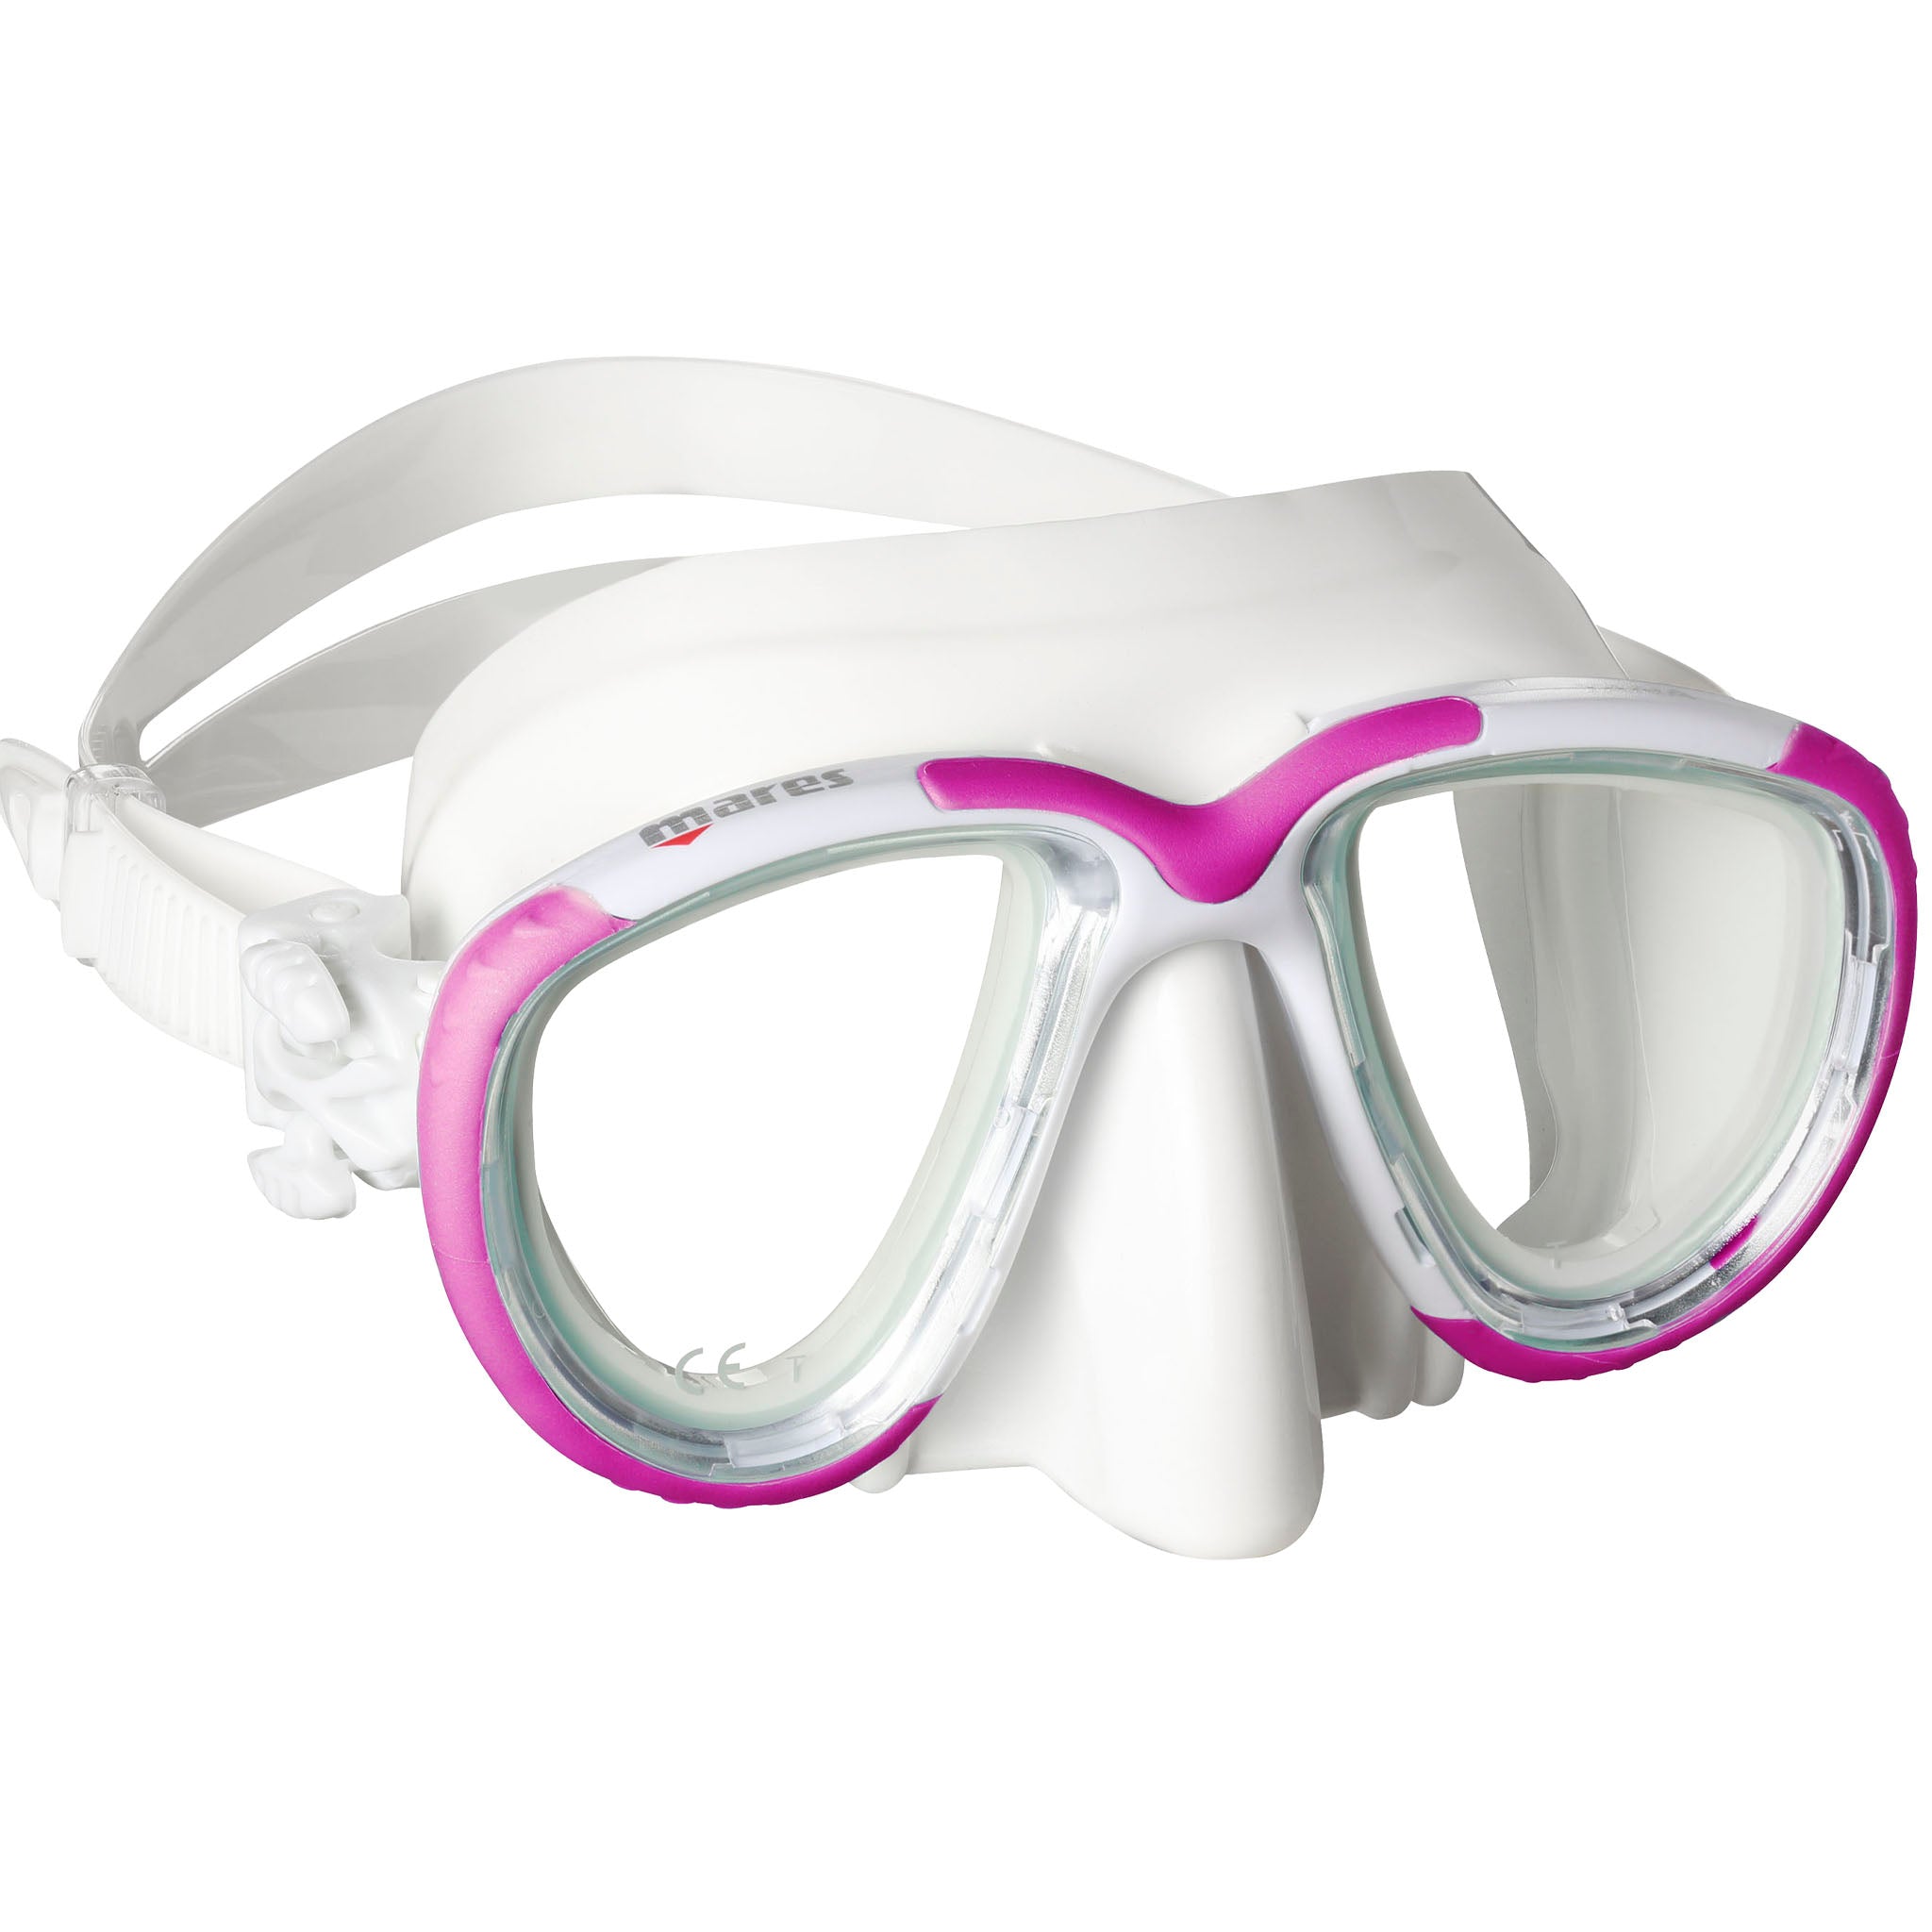 Mares Tana Diving, Snorkelling and Freediving Mask - White Pink White